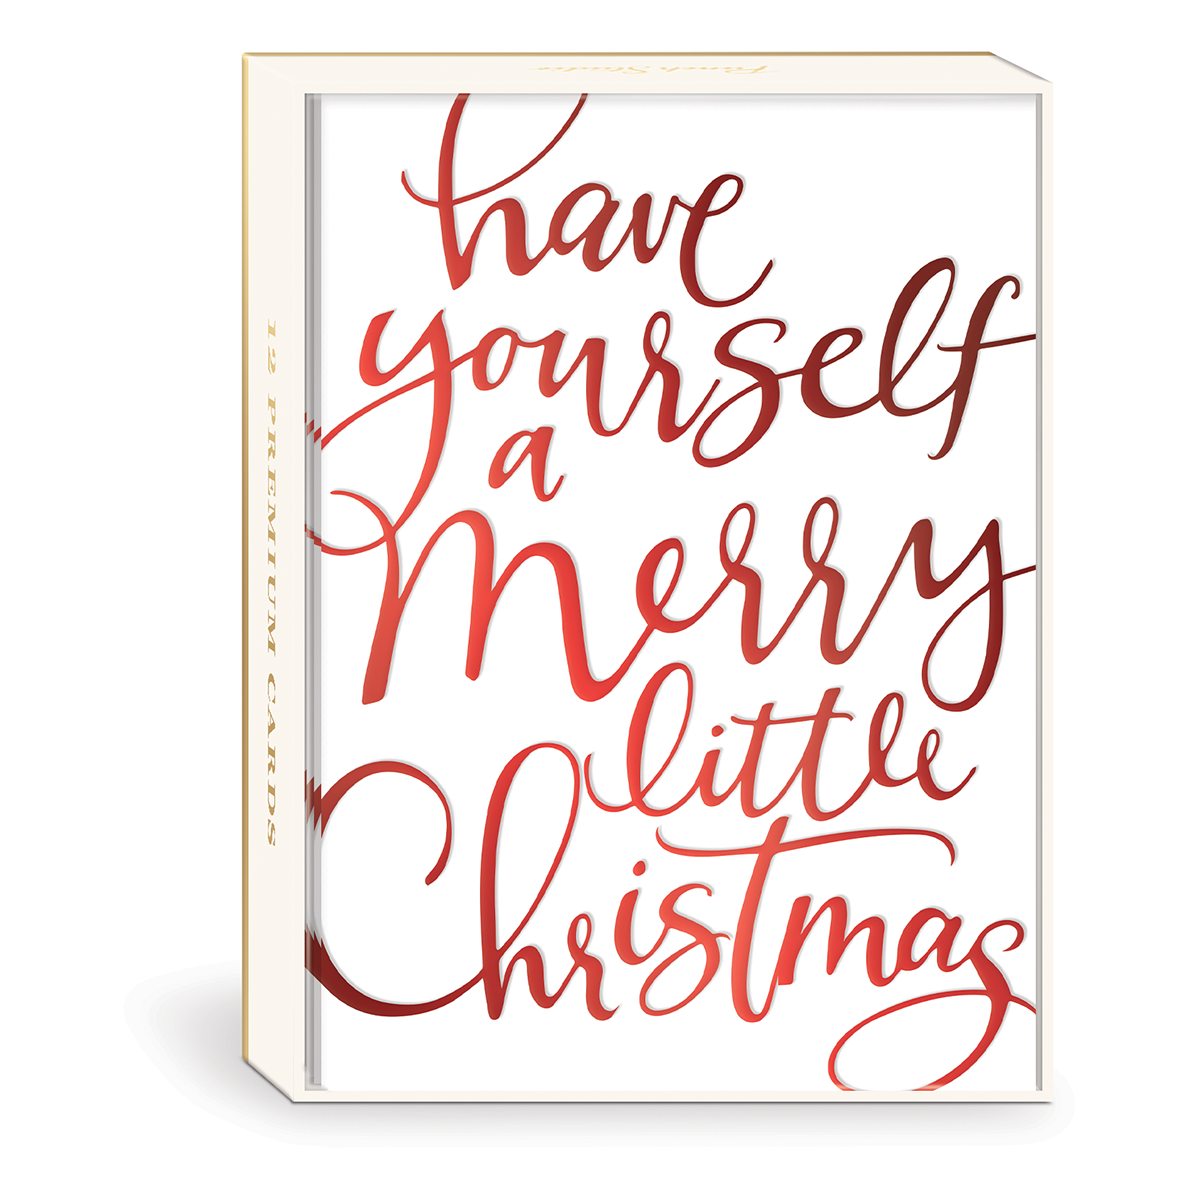 Merry Little Christmas Boxed Holiday Cards Product